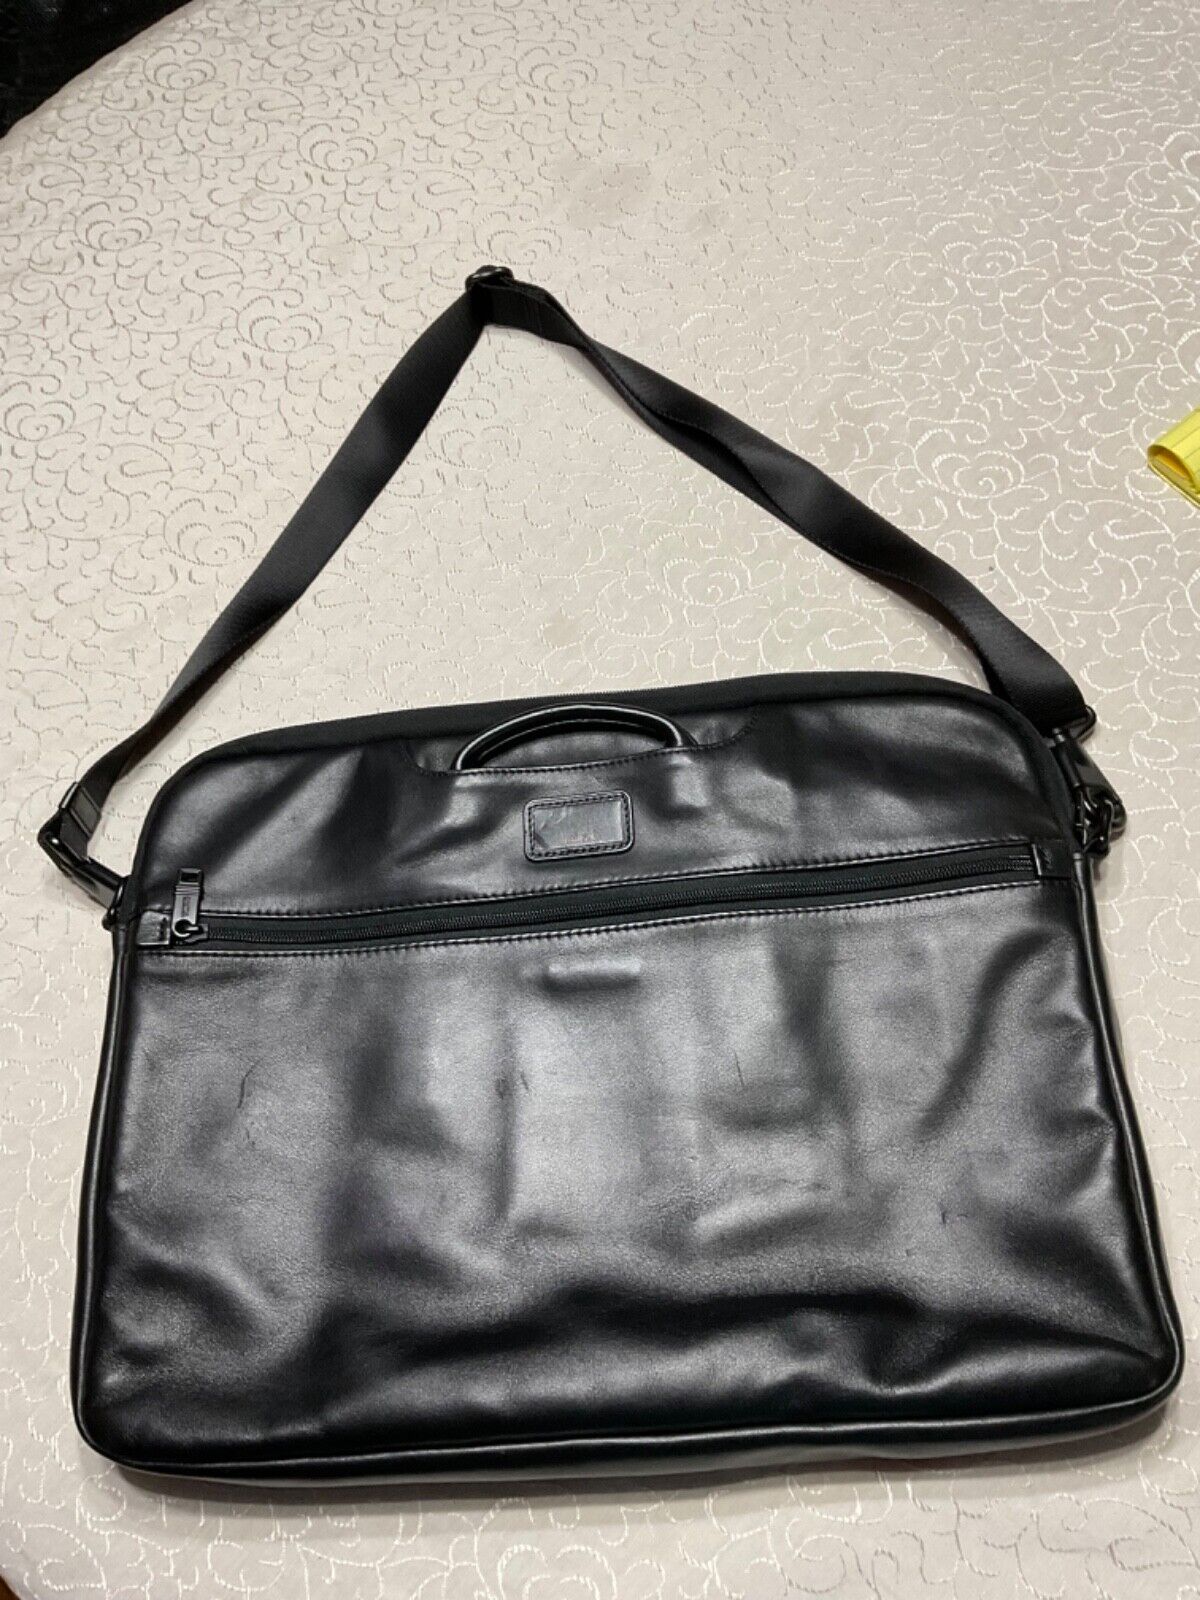 TUMI BriefCase soft black leather Lap Top Bag w add a bag sleeve/adjustable stra